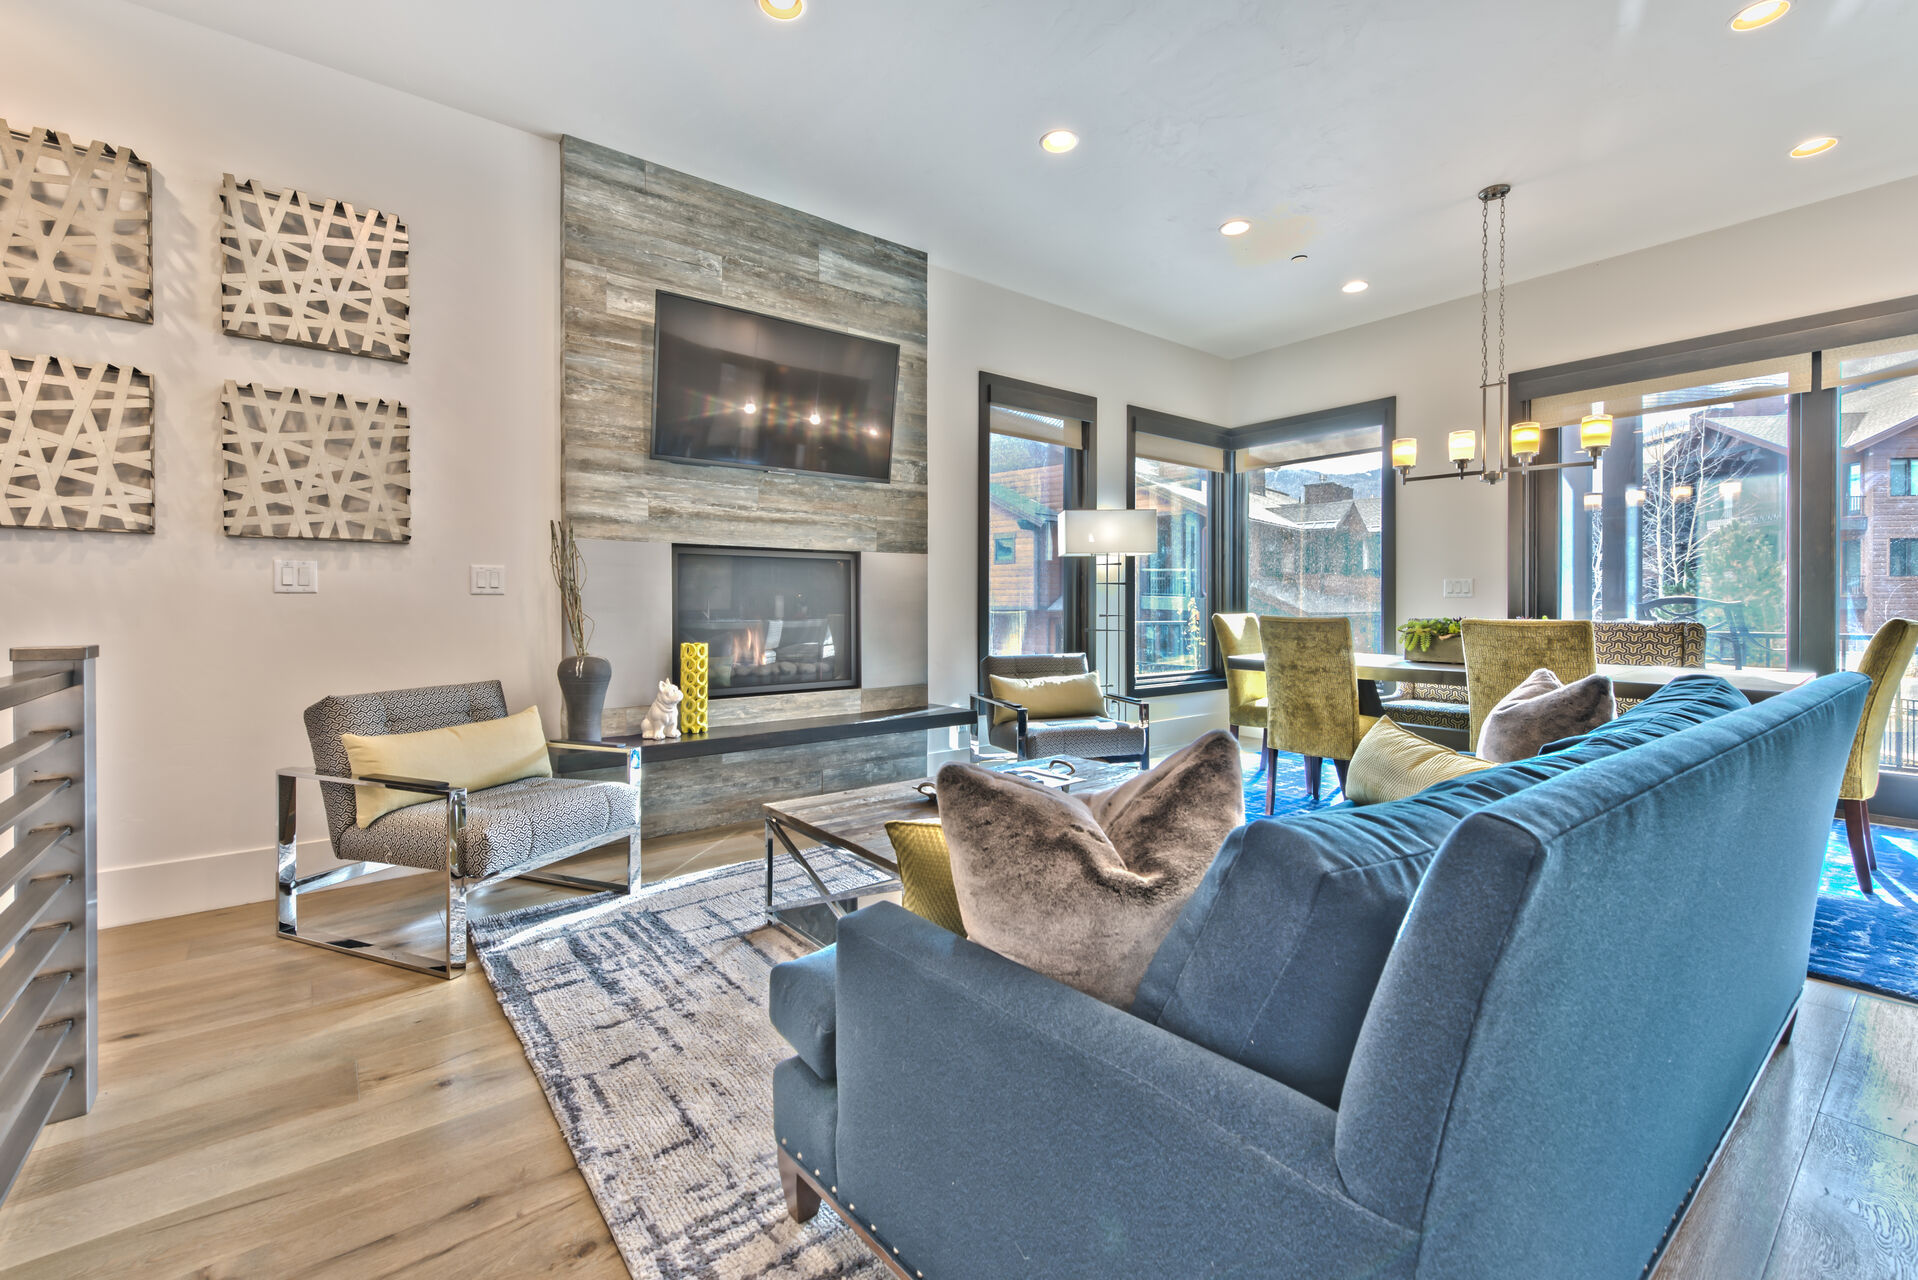 Living Room with Fireplace and TV in One of Our Spring Rentals in Park City.